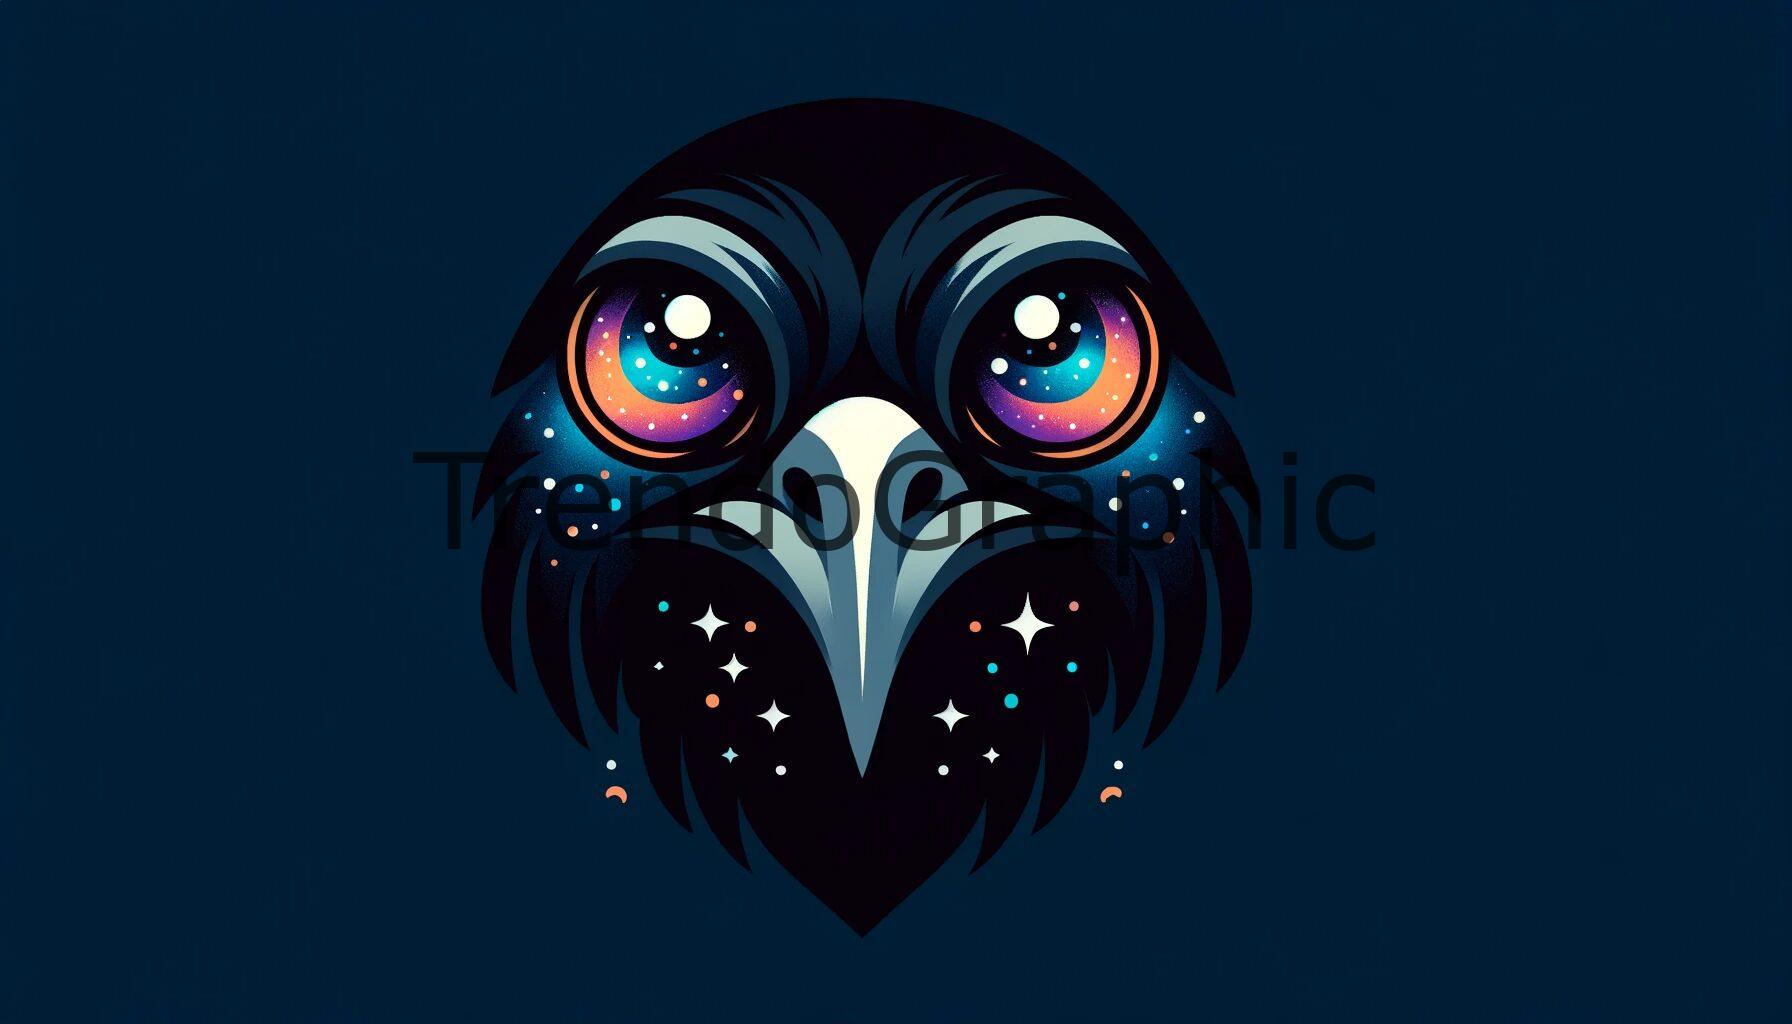 Cosmic Gaze: The Crow with Starry Eyes